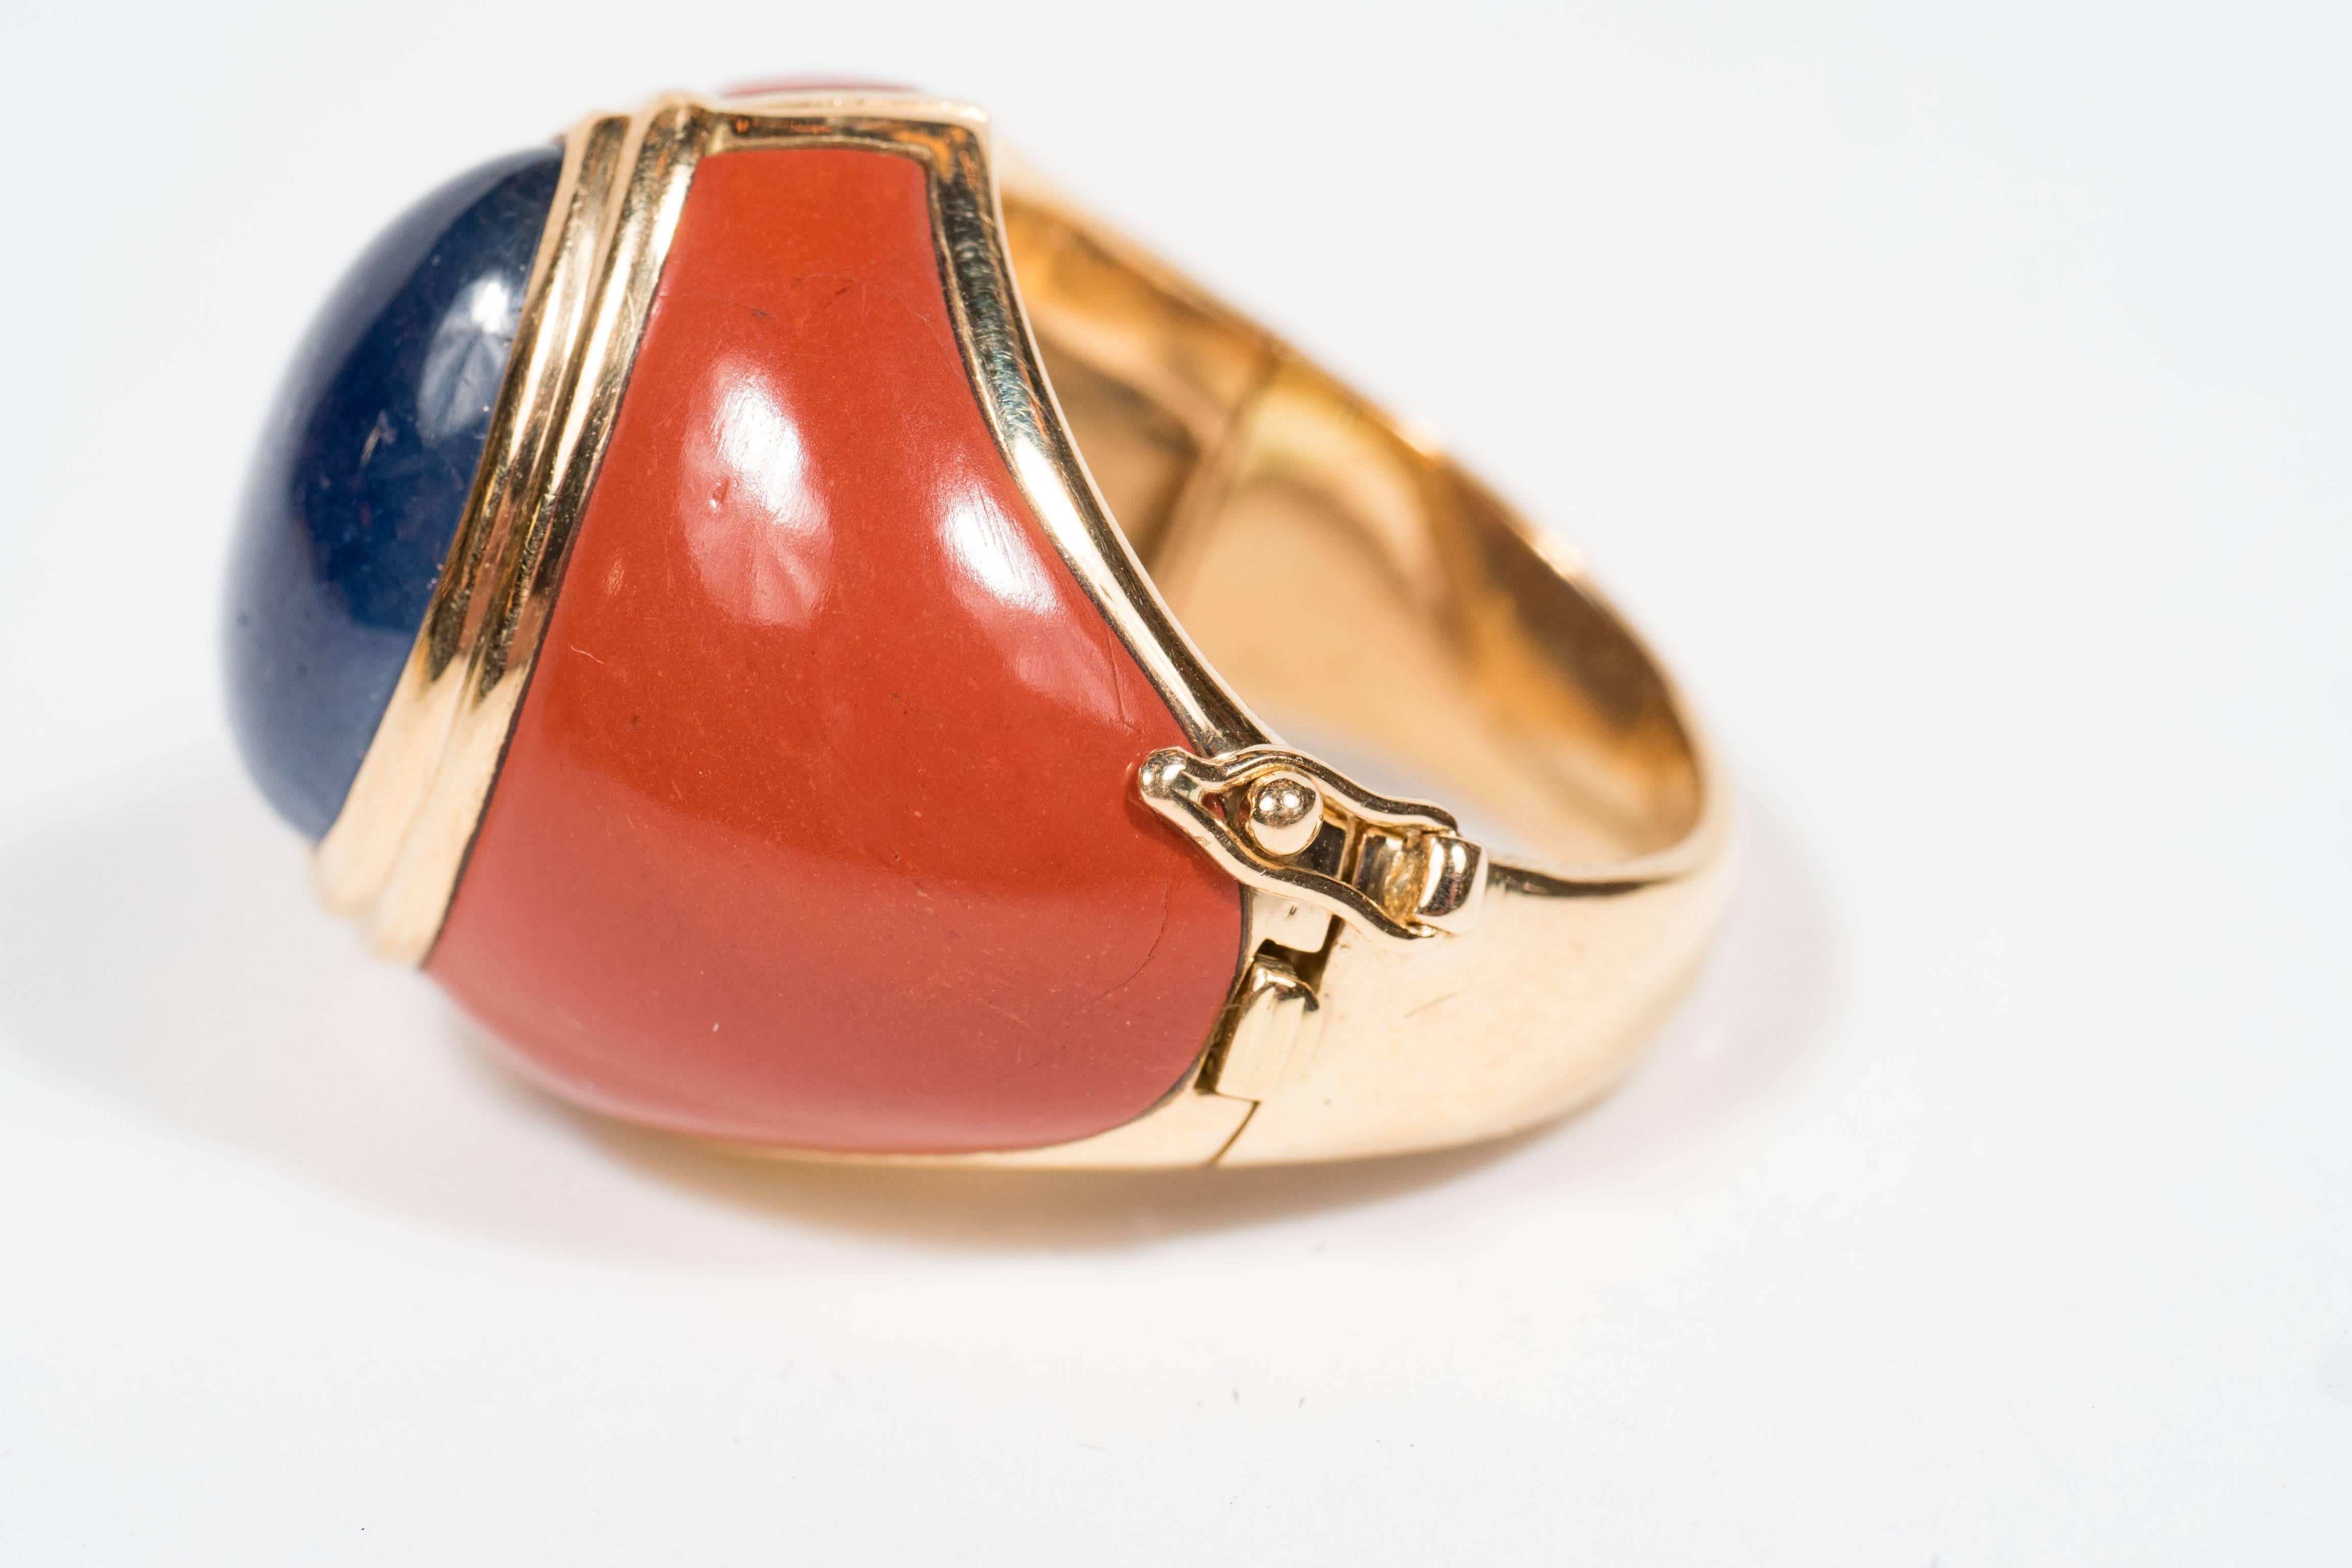 Hand crafted in France circa 1968, this sophisticated ring features a fine pear-shaped cabochon sapphire weighing approximately 12 carats, surrounded by 2 carved jasper plaques, all set in 18kt yellow gold.  The ring is hinged with a clasp to open